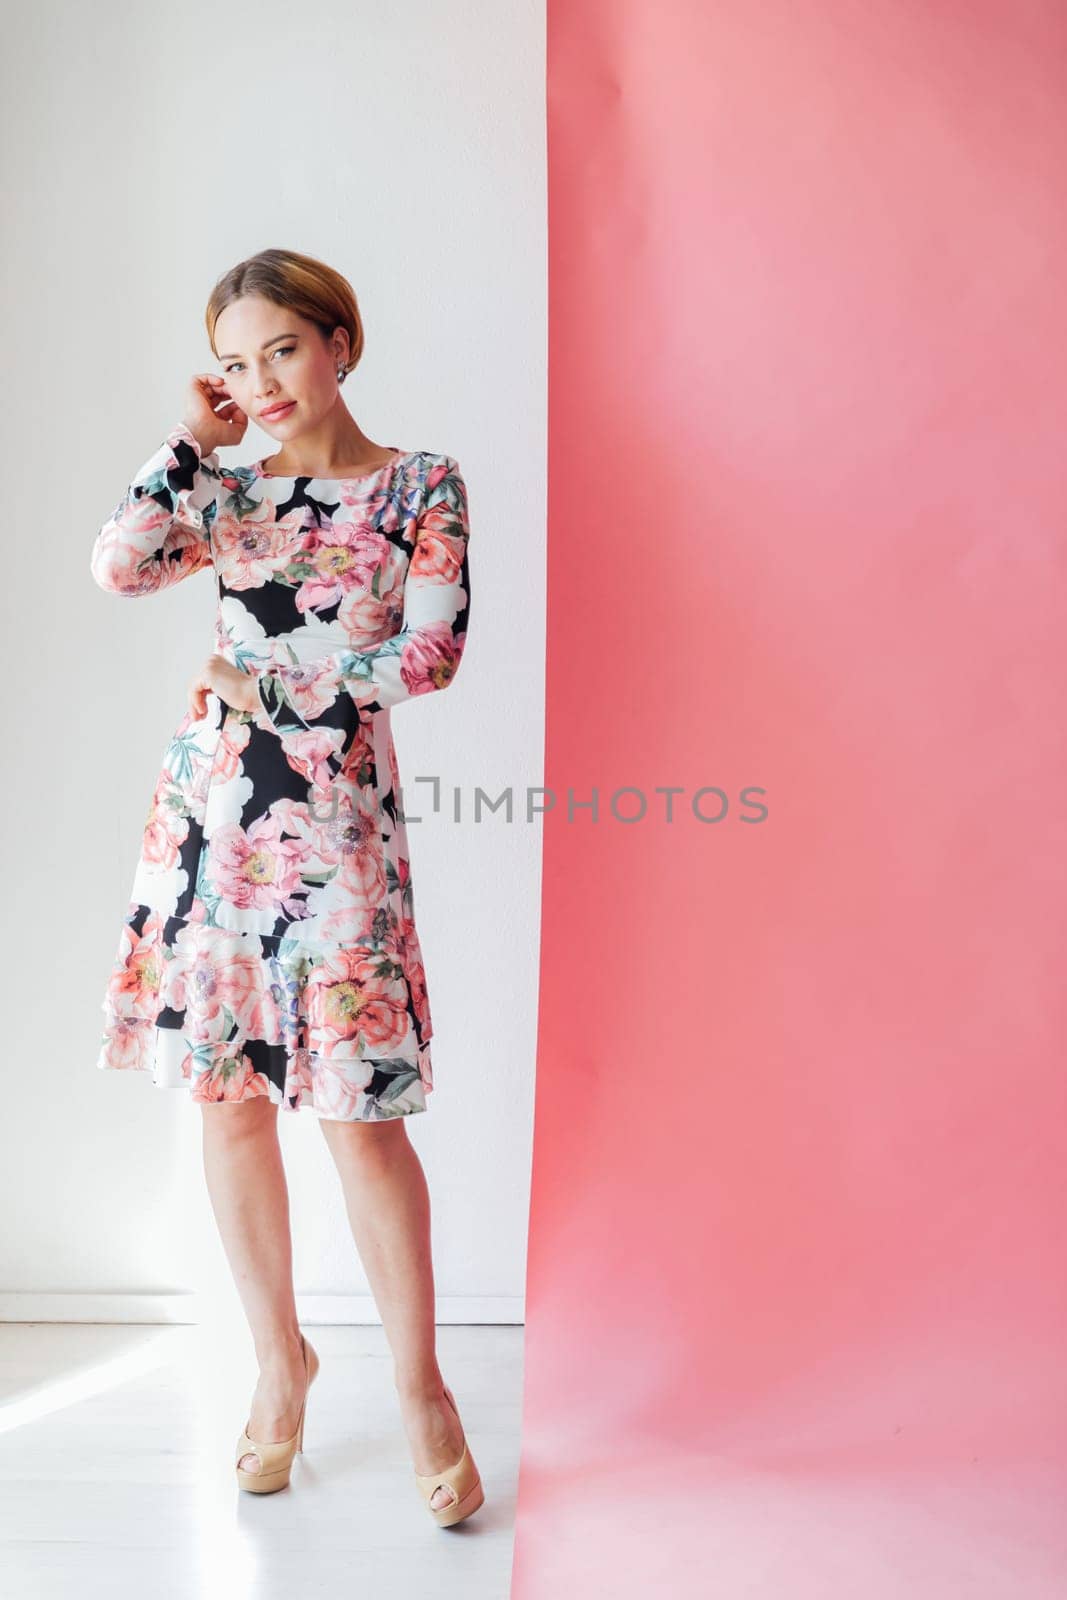 woman in a floral dress stands against a white pink wall